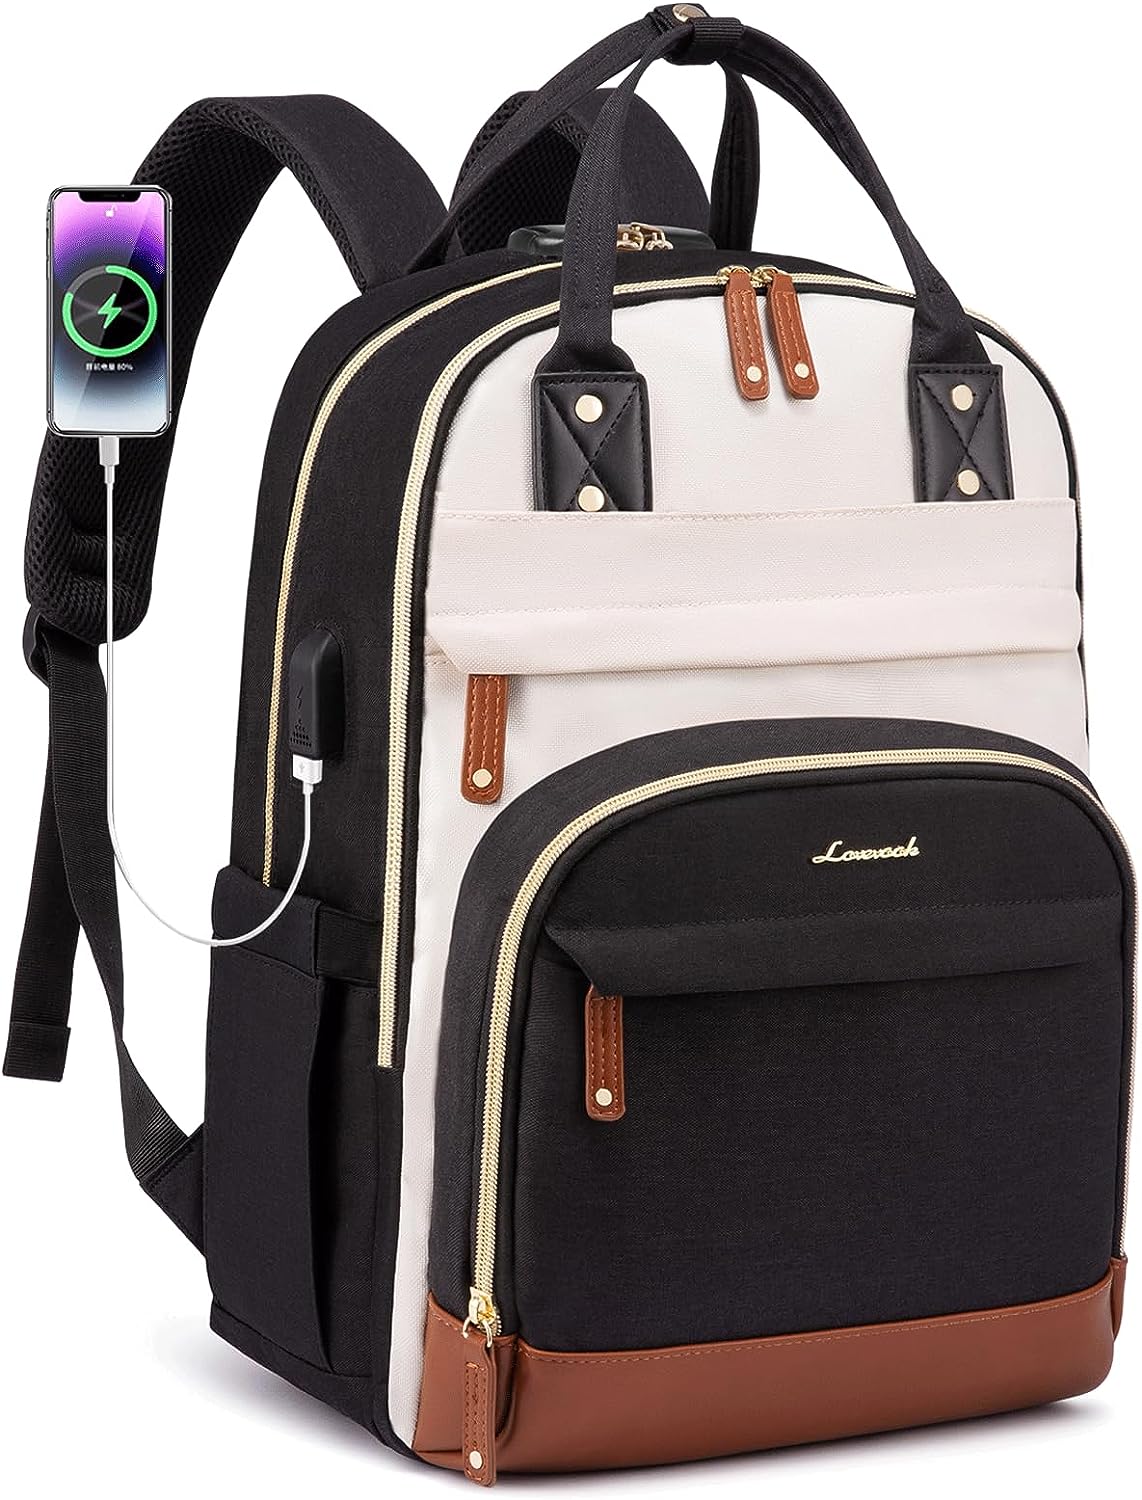 LOVEVOOK Laptop Backpack for Women, Fits 15.6 Inch [...]